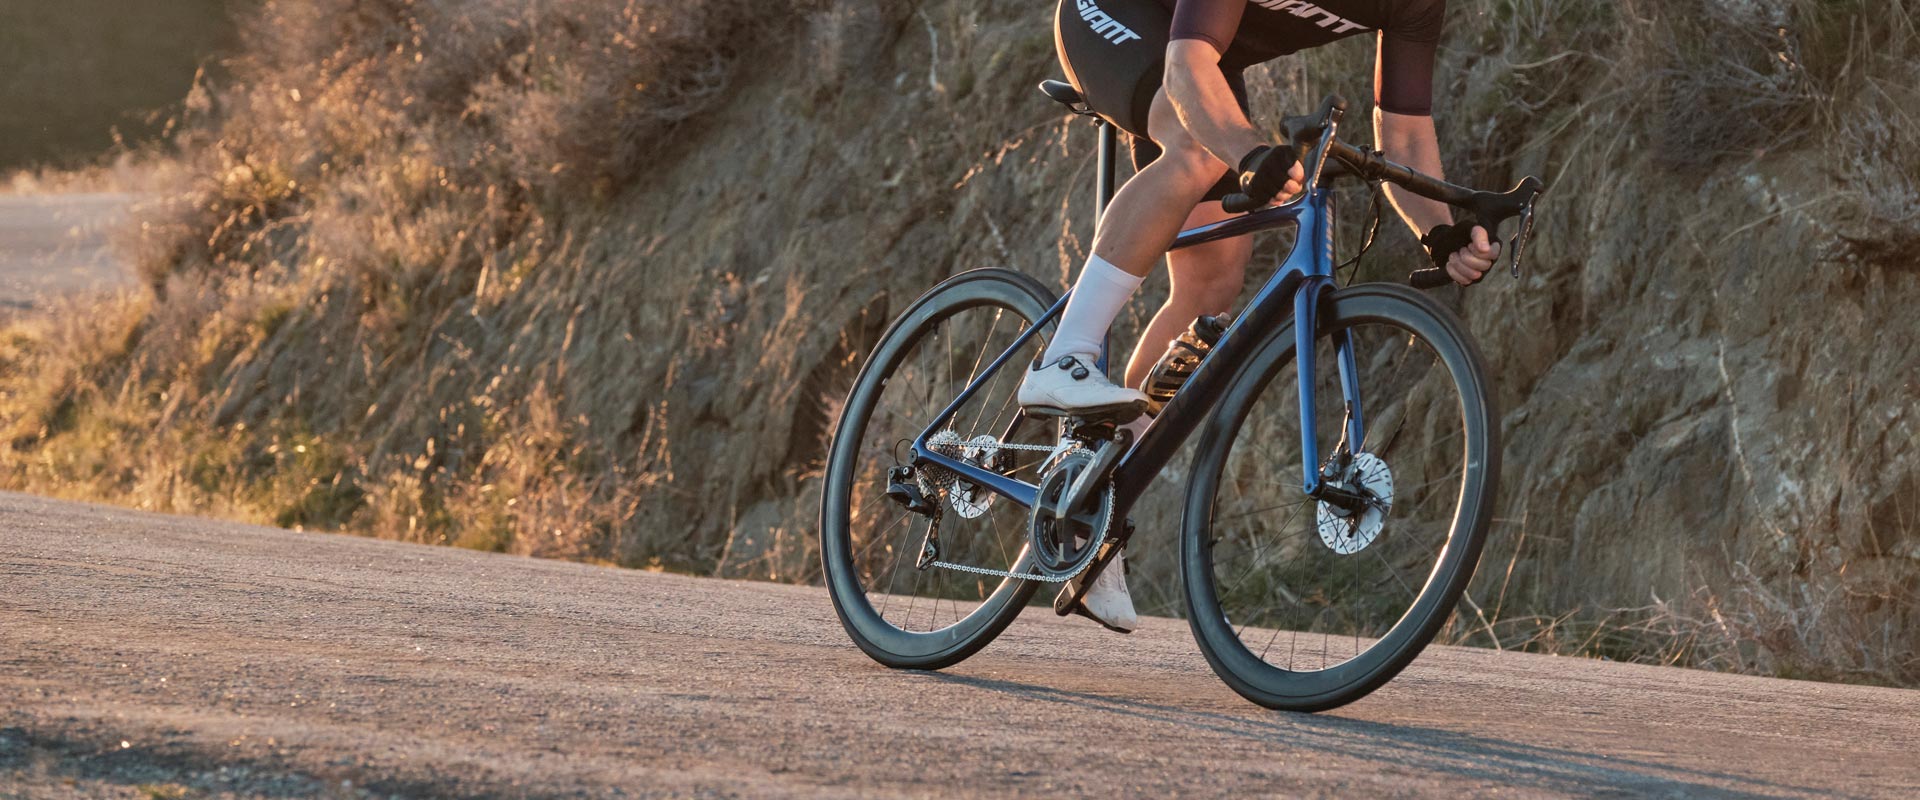 SLR 1 42 Disc WheelSystem | Giant Bicycles Canada